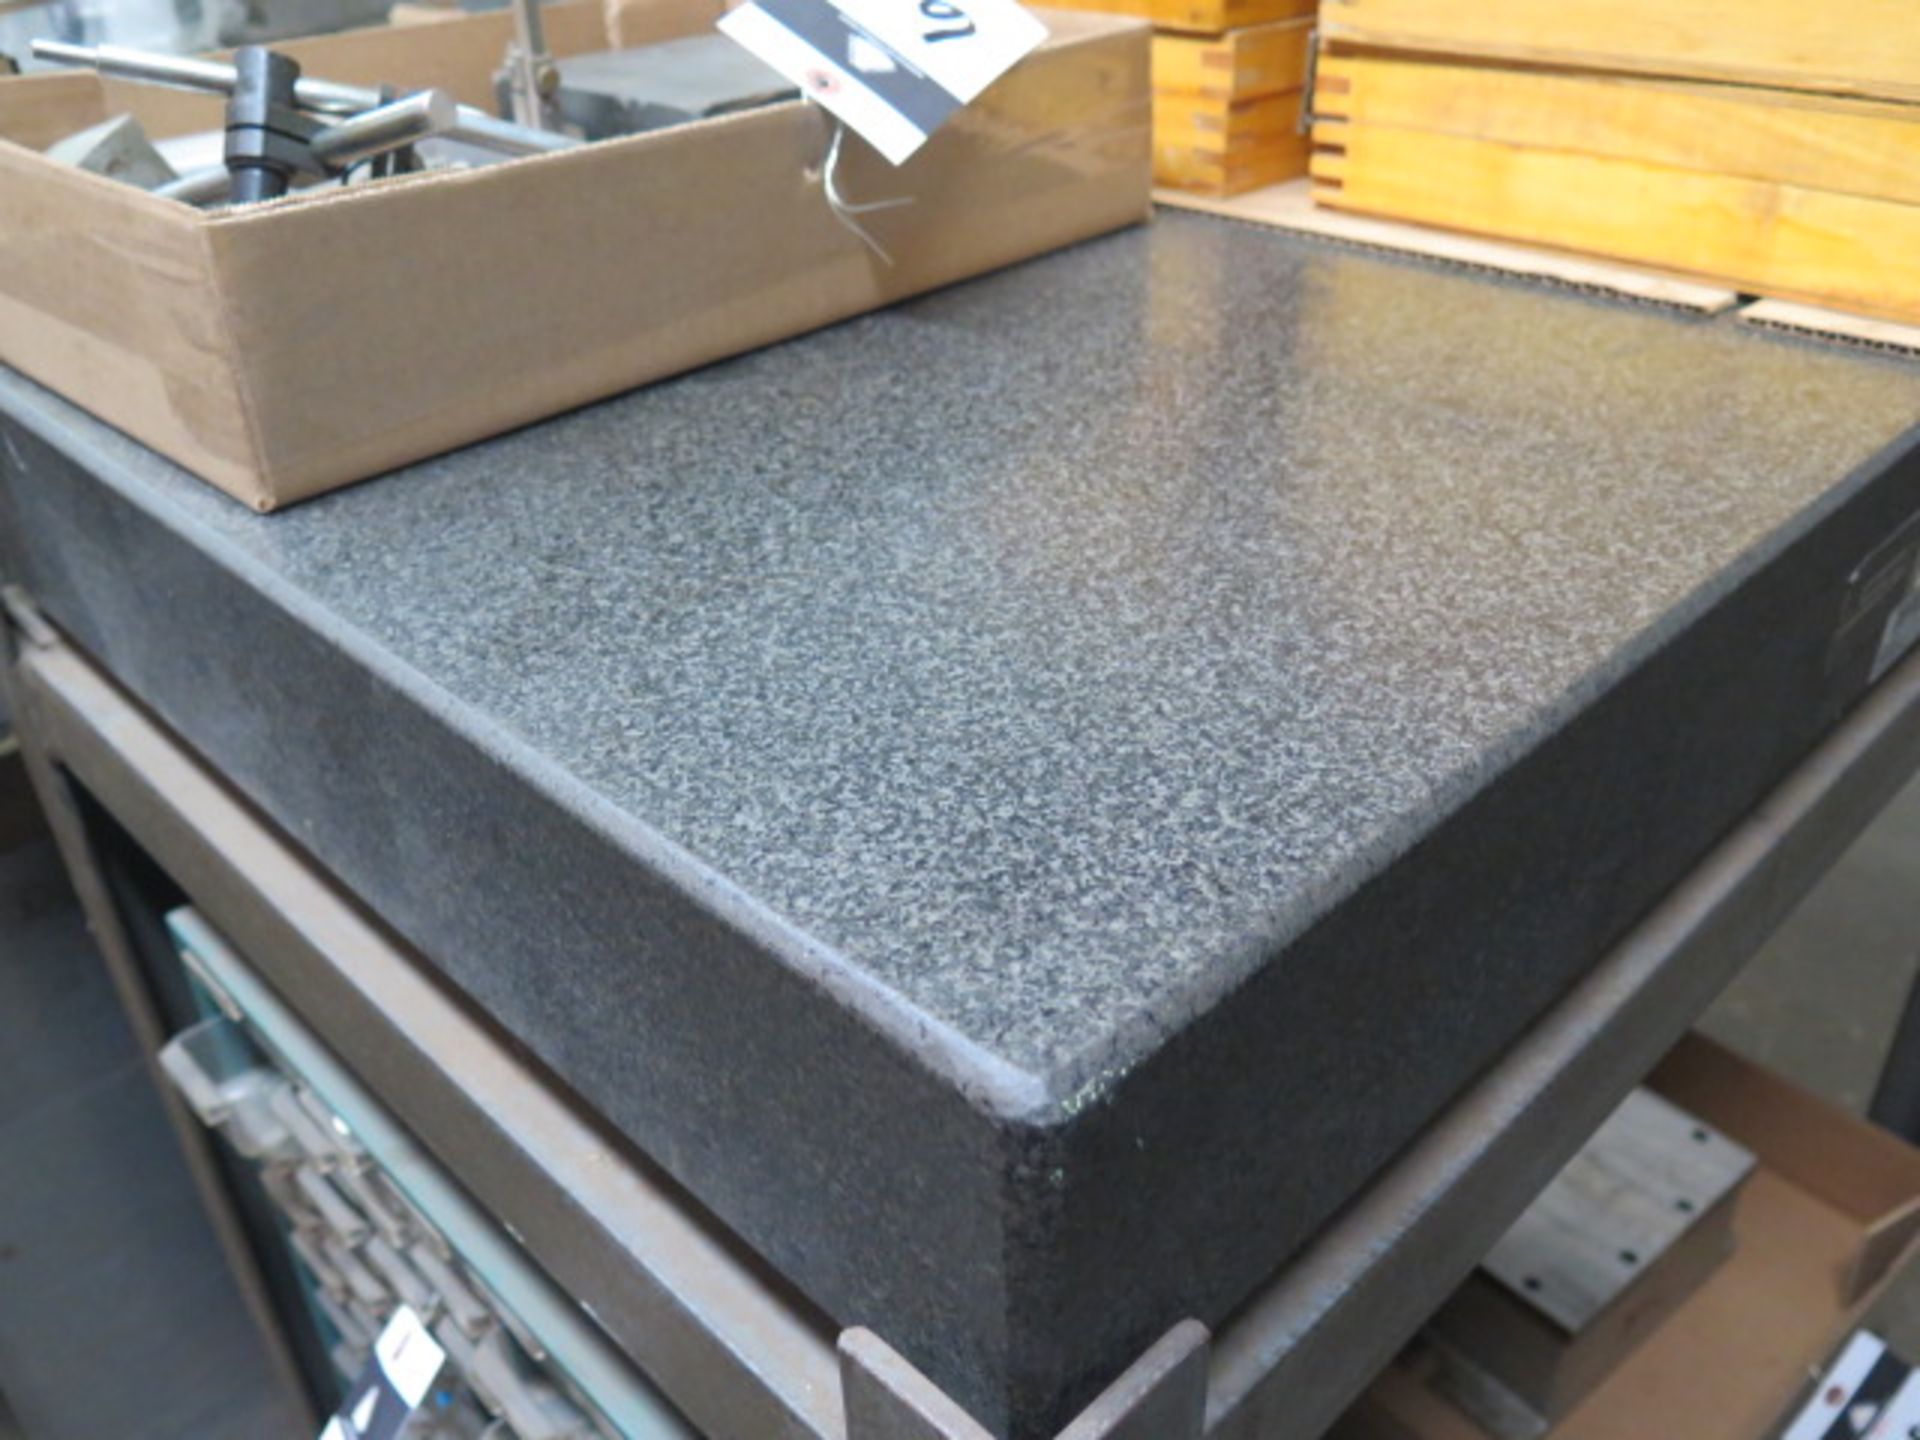 SPI 24" x 36" x 5" Granite Surface Plate w/ Roll Stand (SOLD AS-IS - NO WARRANTY) - Image 2 of 3